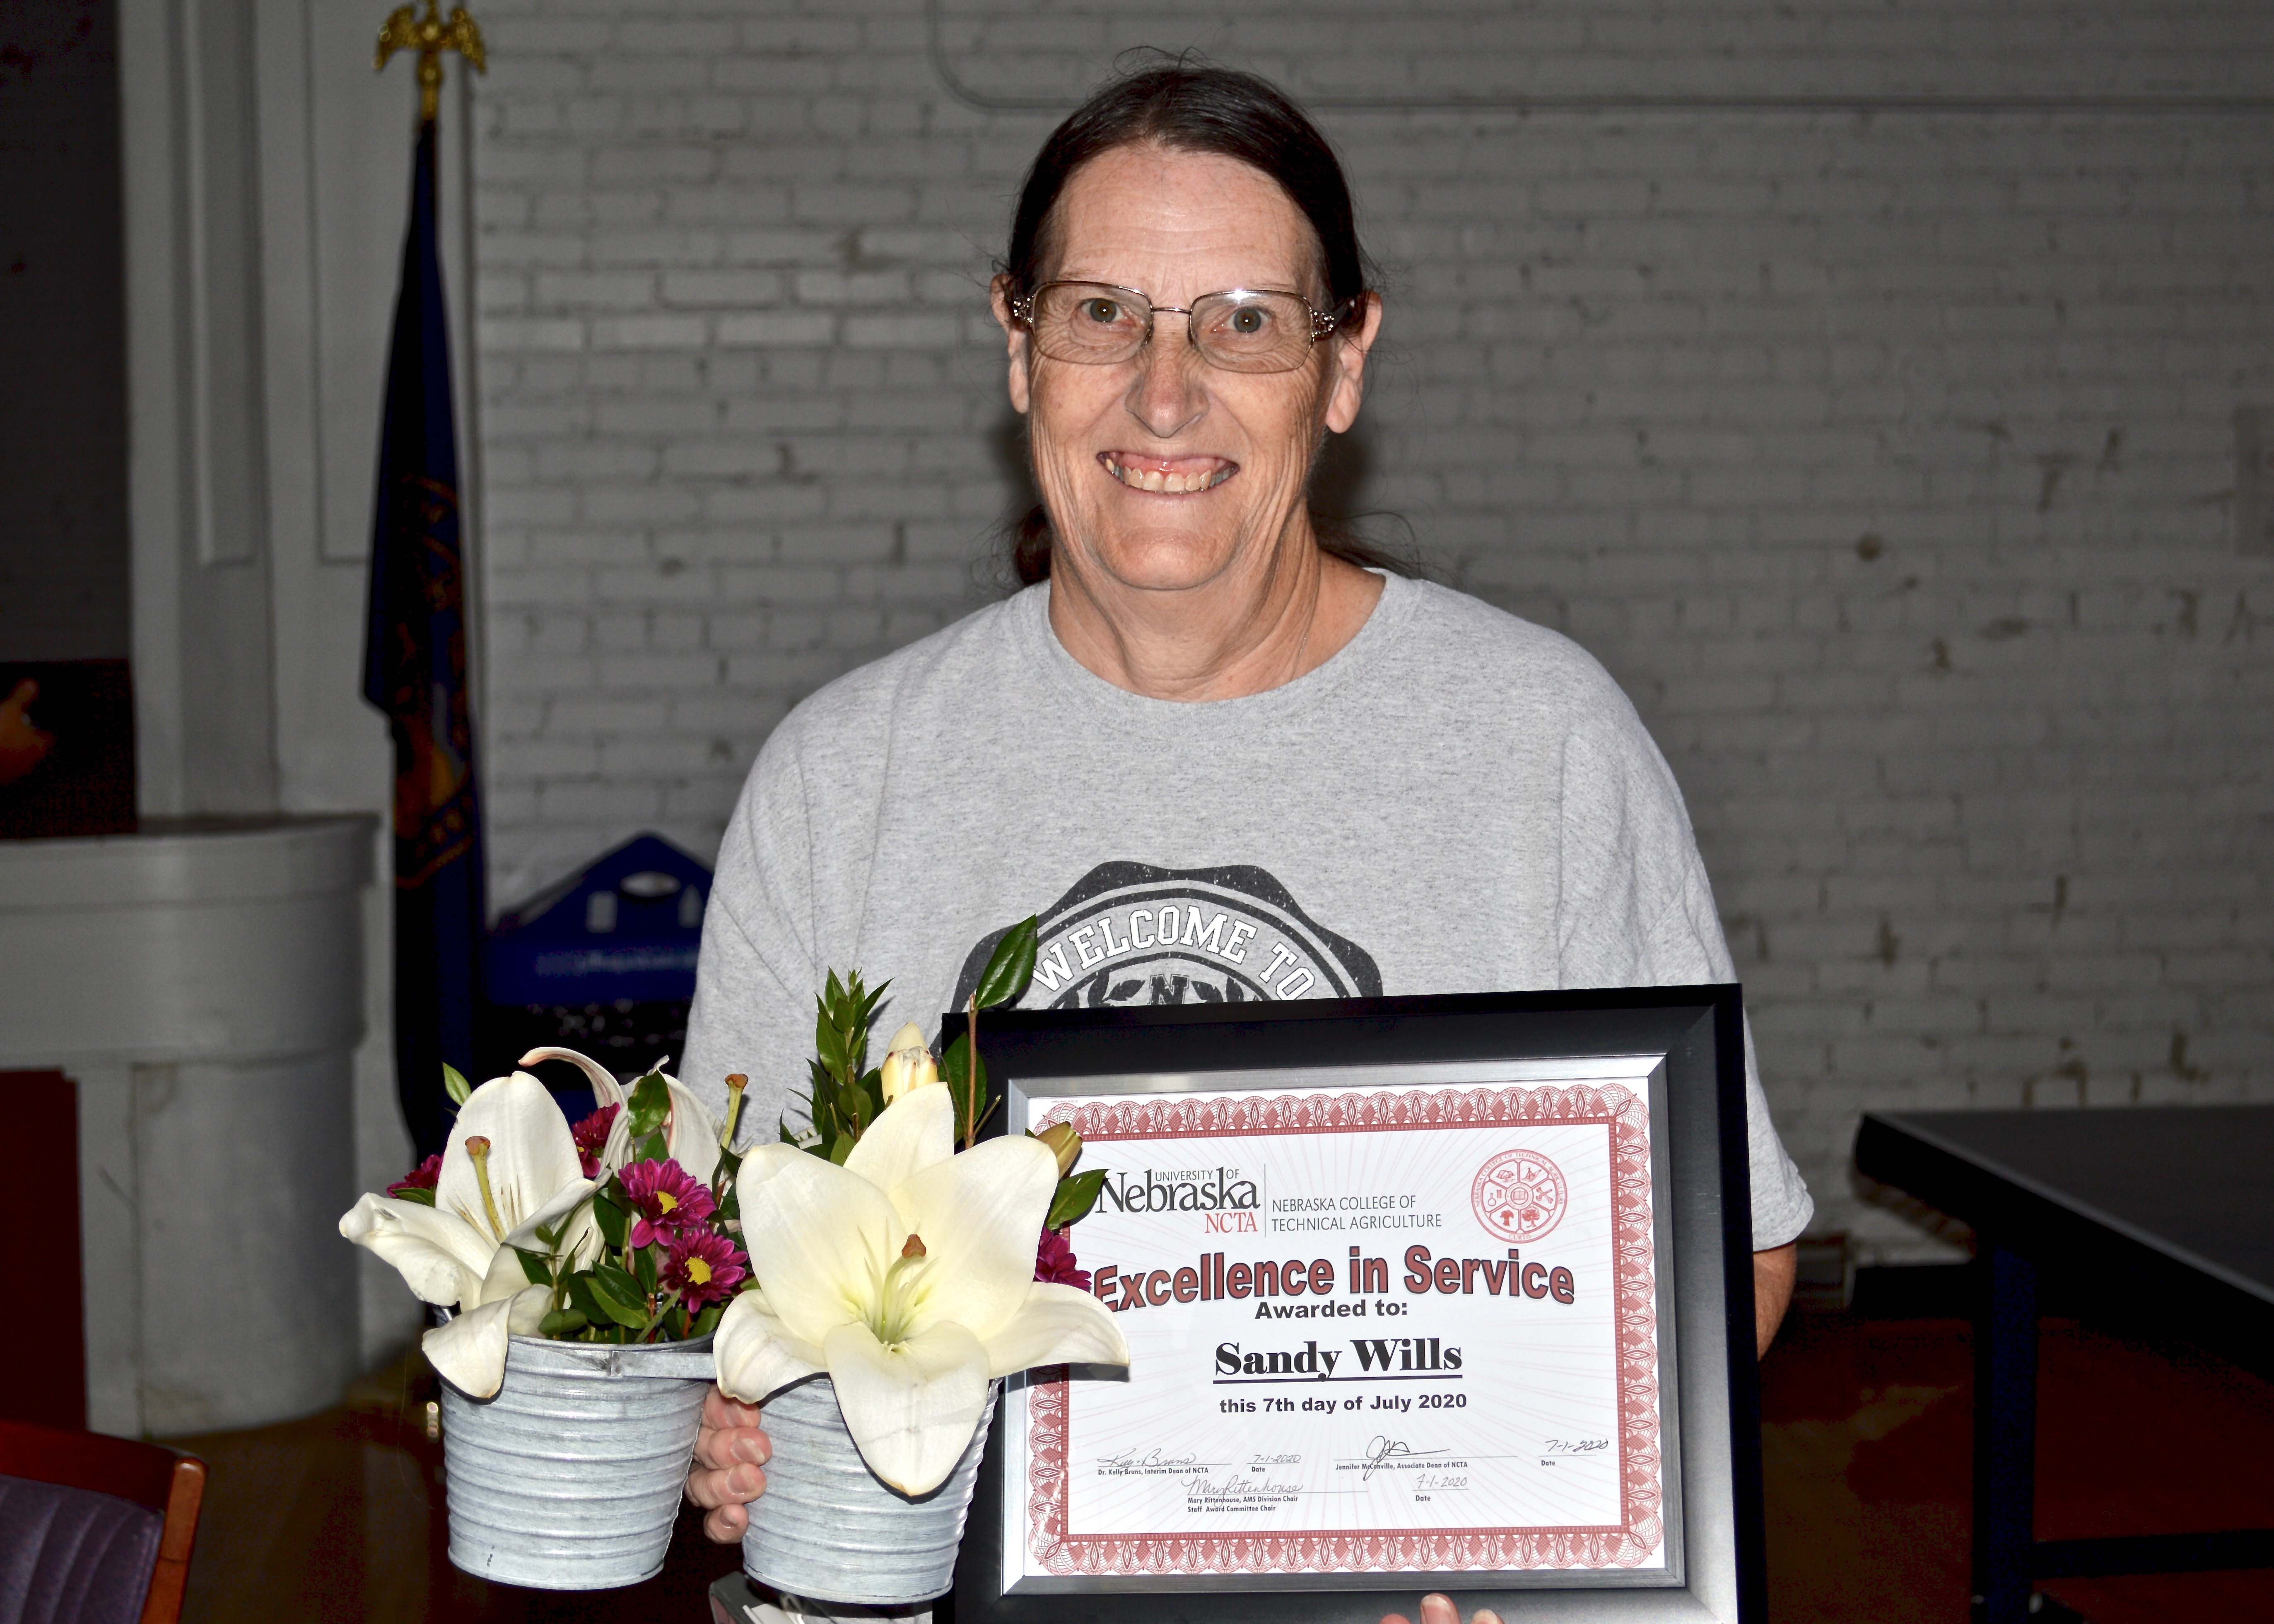 Sandy Wills, a 25-year employee of the Nebraska College of Technical Agriculture, received the 2020 Excellence in Service Award. (S. Nutter/ NCTA News Photo)